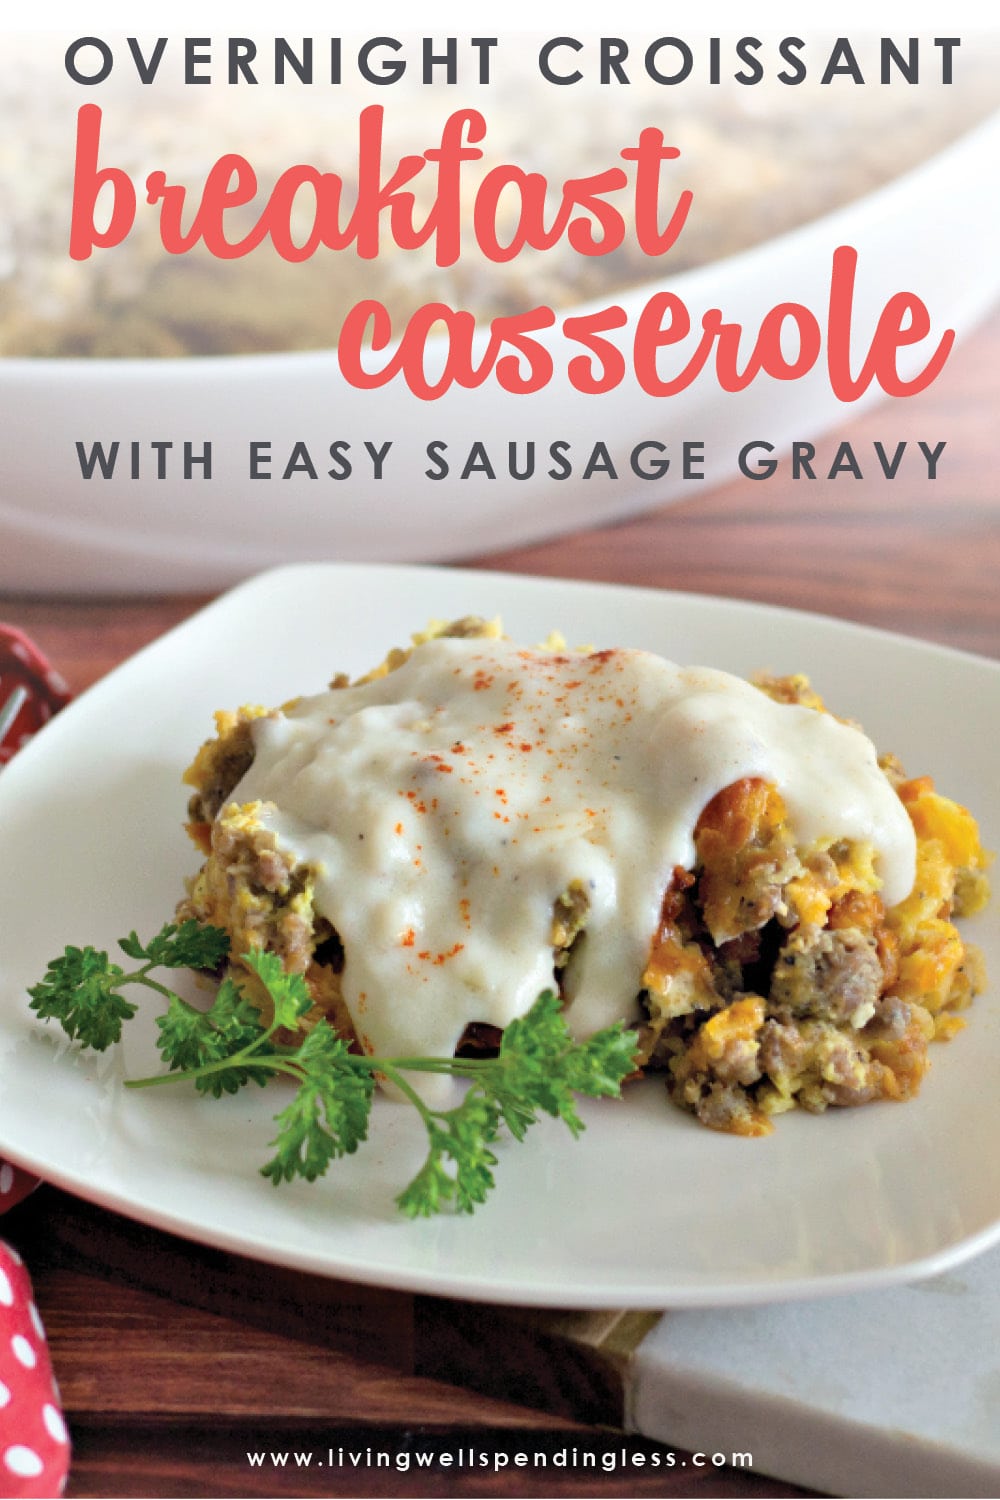 This overnight croissant breakfast casserole with sawmill gravy can be made the night before so all you have to do the next morning is pop it into the oven! Perfect for the holidays (or anytime)! #recipes #breakfastrecipes #holidayrecipes #makeaheadrecipes #breakfastcasserole